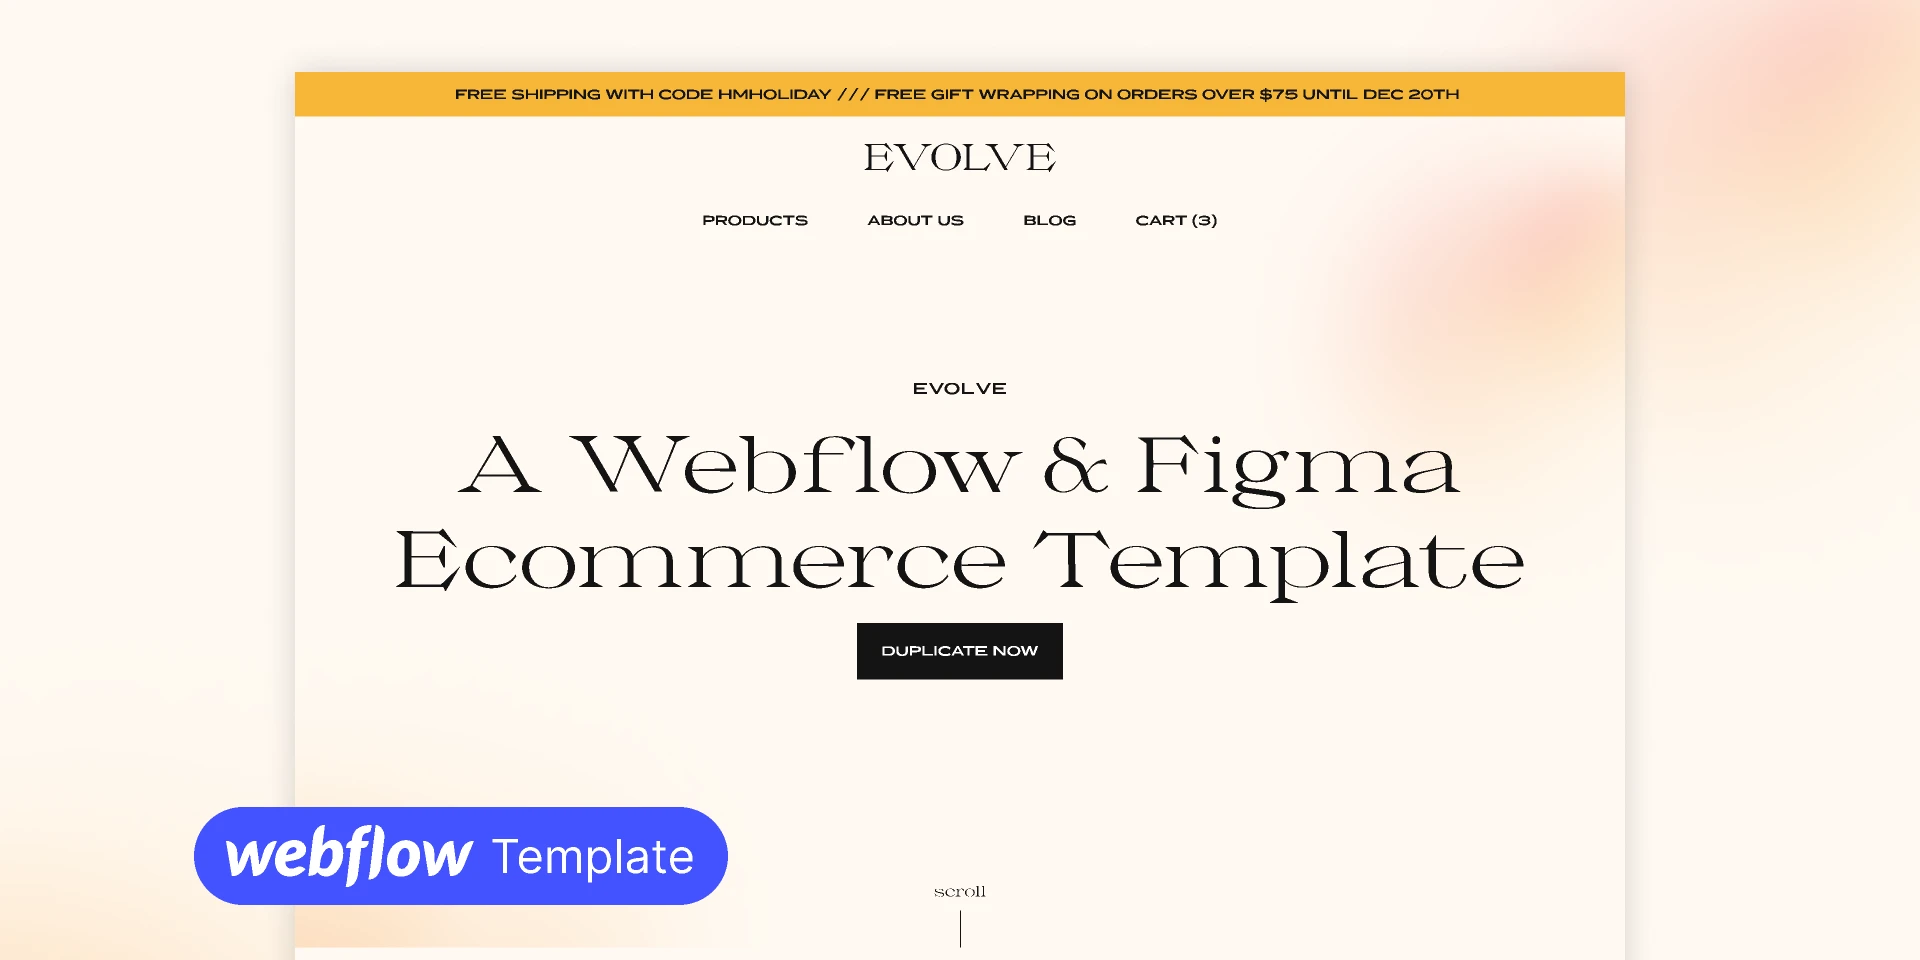 Evolve Webflow Ecommerce Template for Figma and Adobe XD